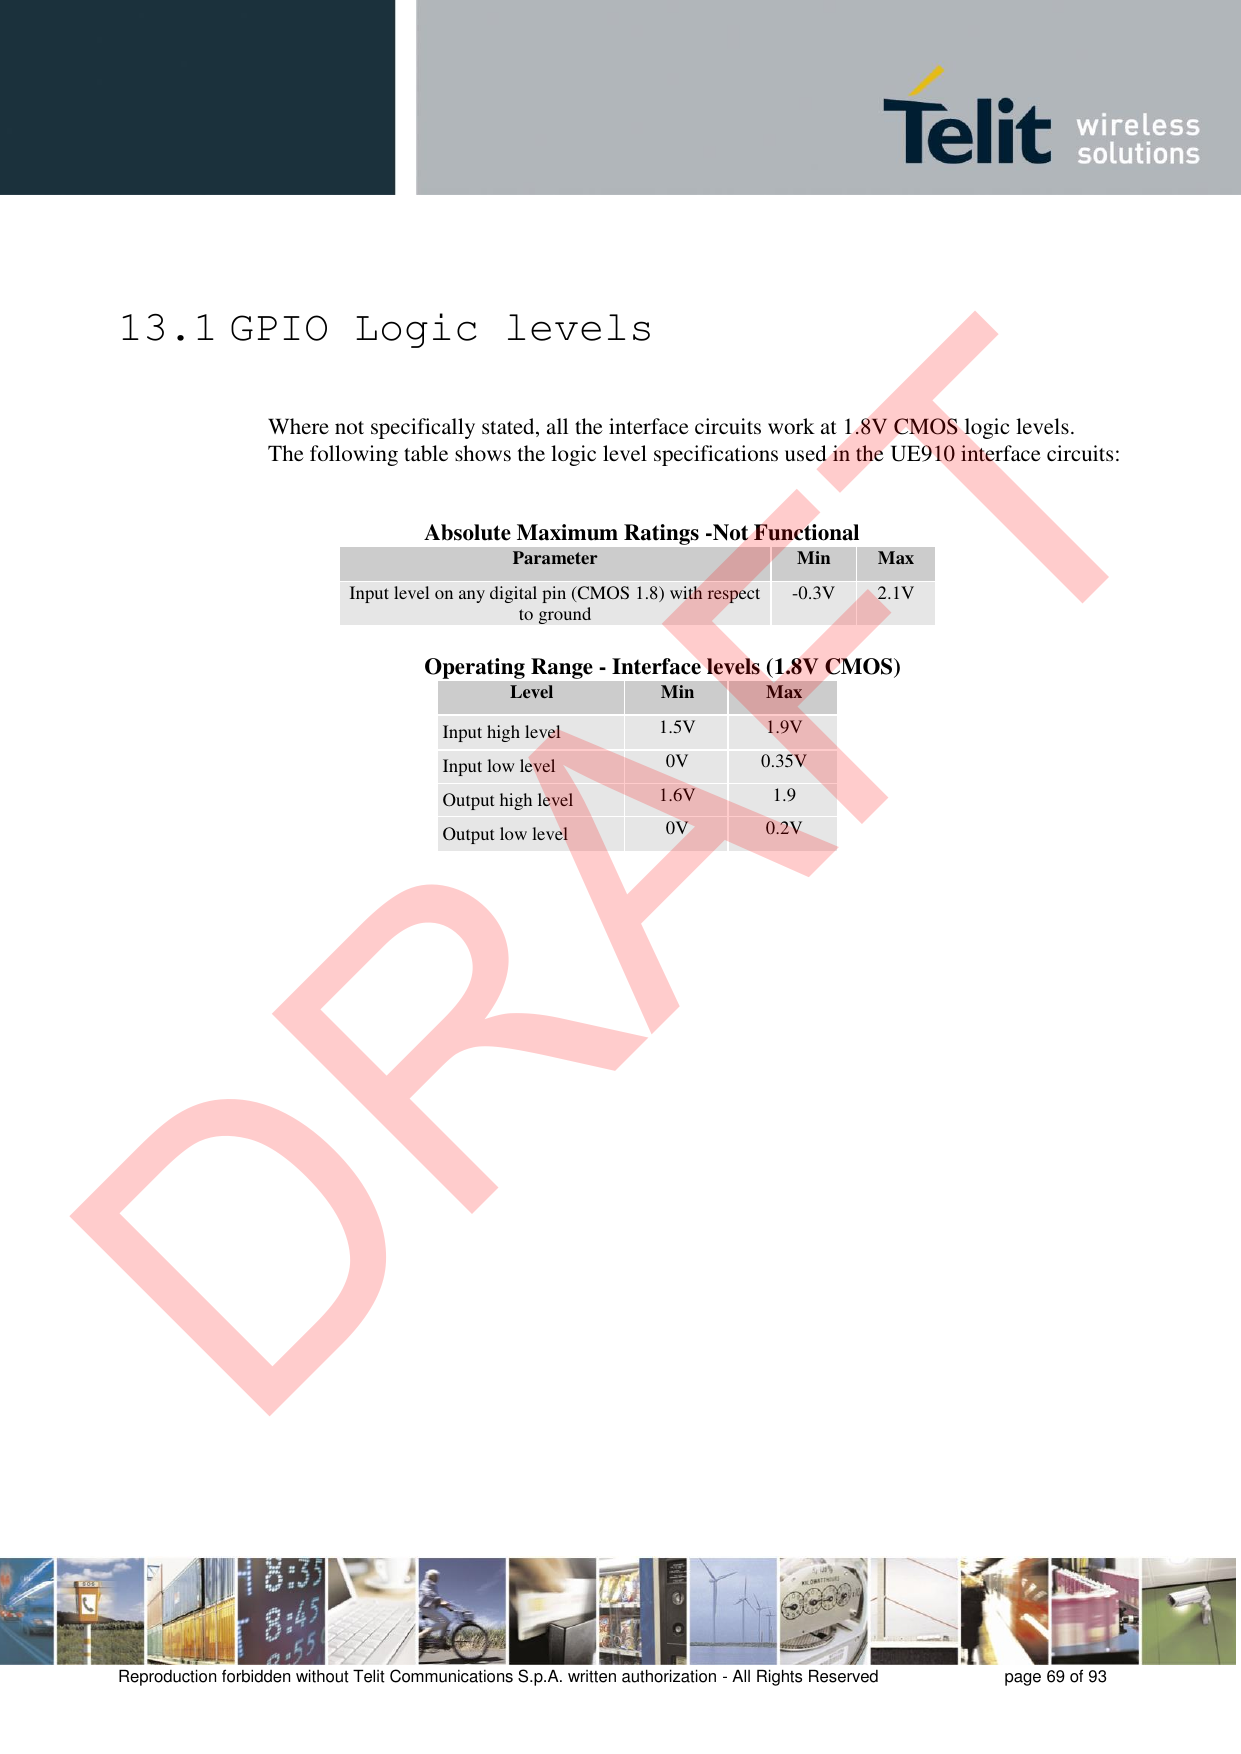 Reproduction forbidden without Telit Communications S.p.A. written authorization - All Rights Reserved  page 69 of 93 13.1 GPIO Logic levels Where not specifically stated, all the interface circuits work at 1.8V CMOS logic levels. The following table shows the logic level specifications used in the UE910 interface circuits:        Absolute Maximum Ratings -Not Functional Parameter Min Max Input level on any digital pin (CMOS 1.8) with respect to ground -0.3V2.1V        Operating Range - Interface levels (1.8V CMOS) Level Min Max Input high level 1.5V 1.9V Input low level 0V 0.35V Output high level 1.6V 1.9 Output low level 0V 0.2V DRAFT